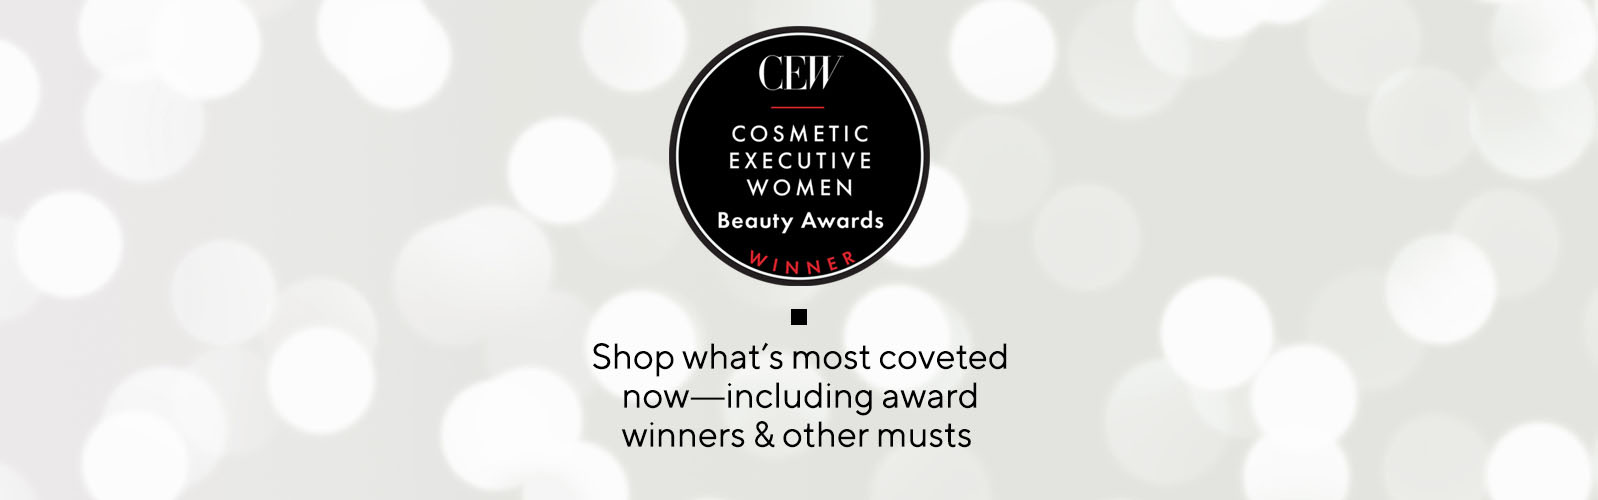 CEW Beauty Insider Awards 2019. Shop what's most coveted now—including award winners & other musts